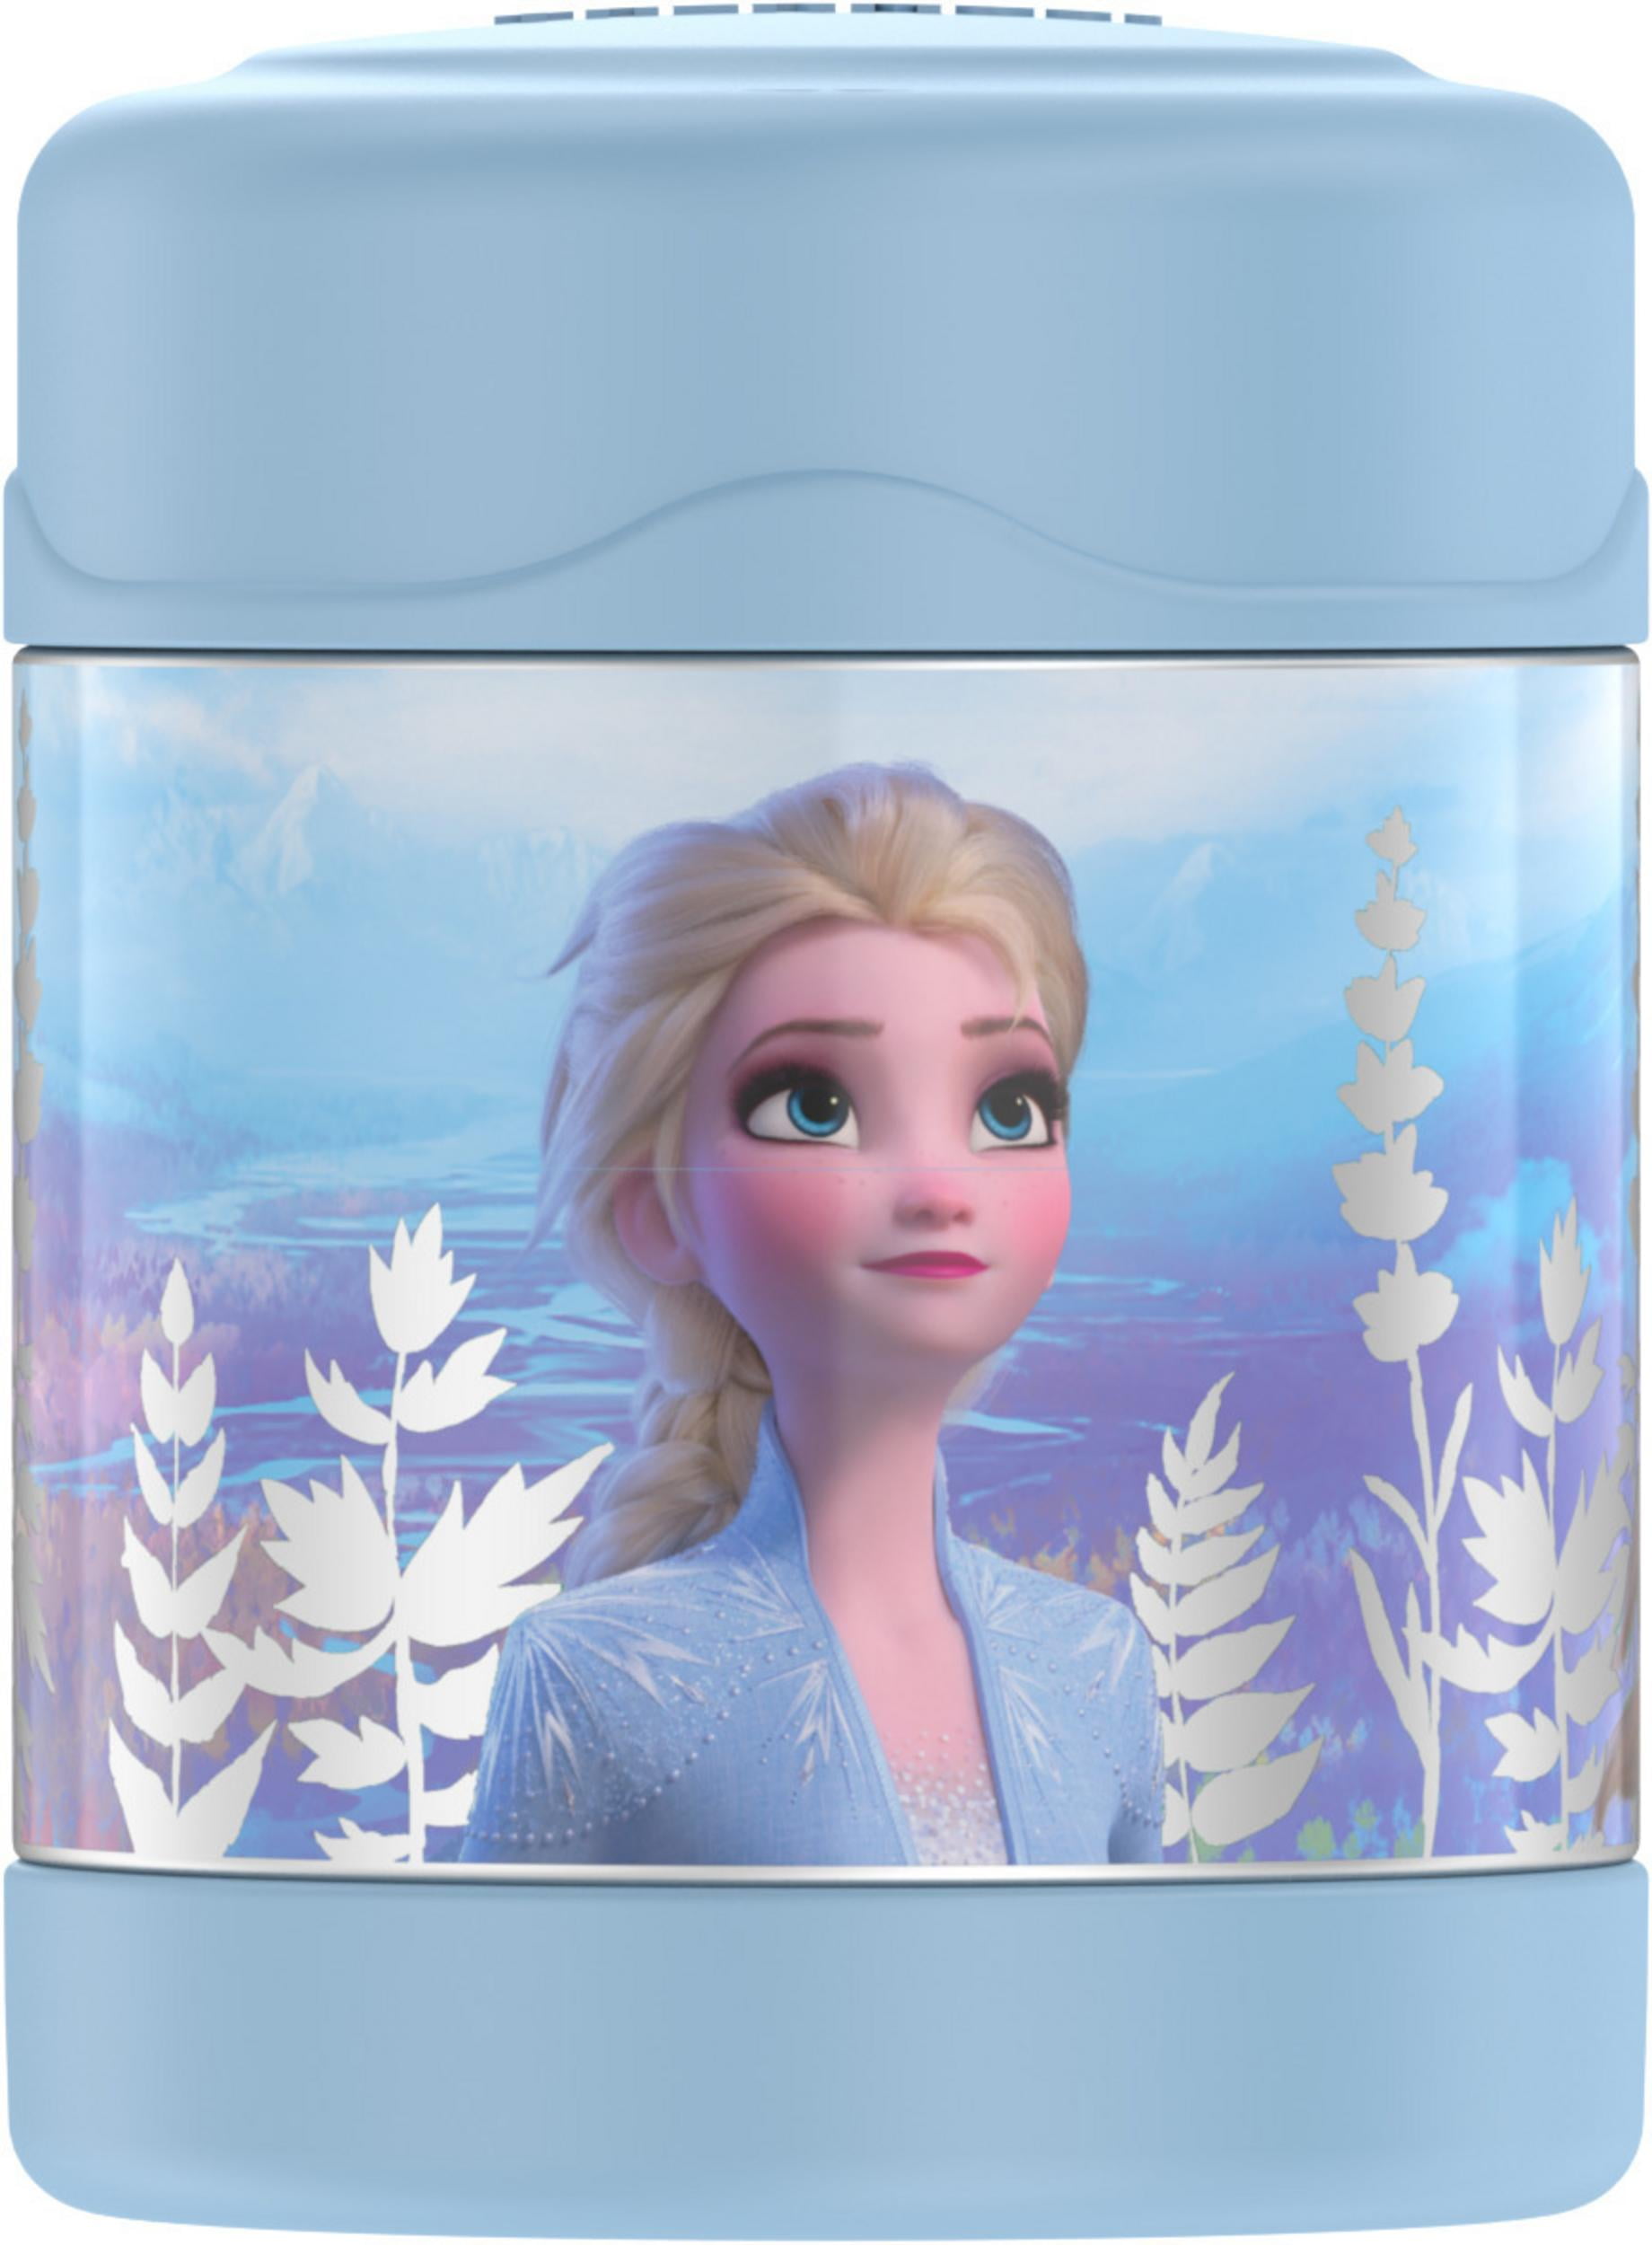 Thermos Funtainer 10 Ounce Food Jar - Frozen, 1 - Kroger